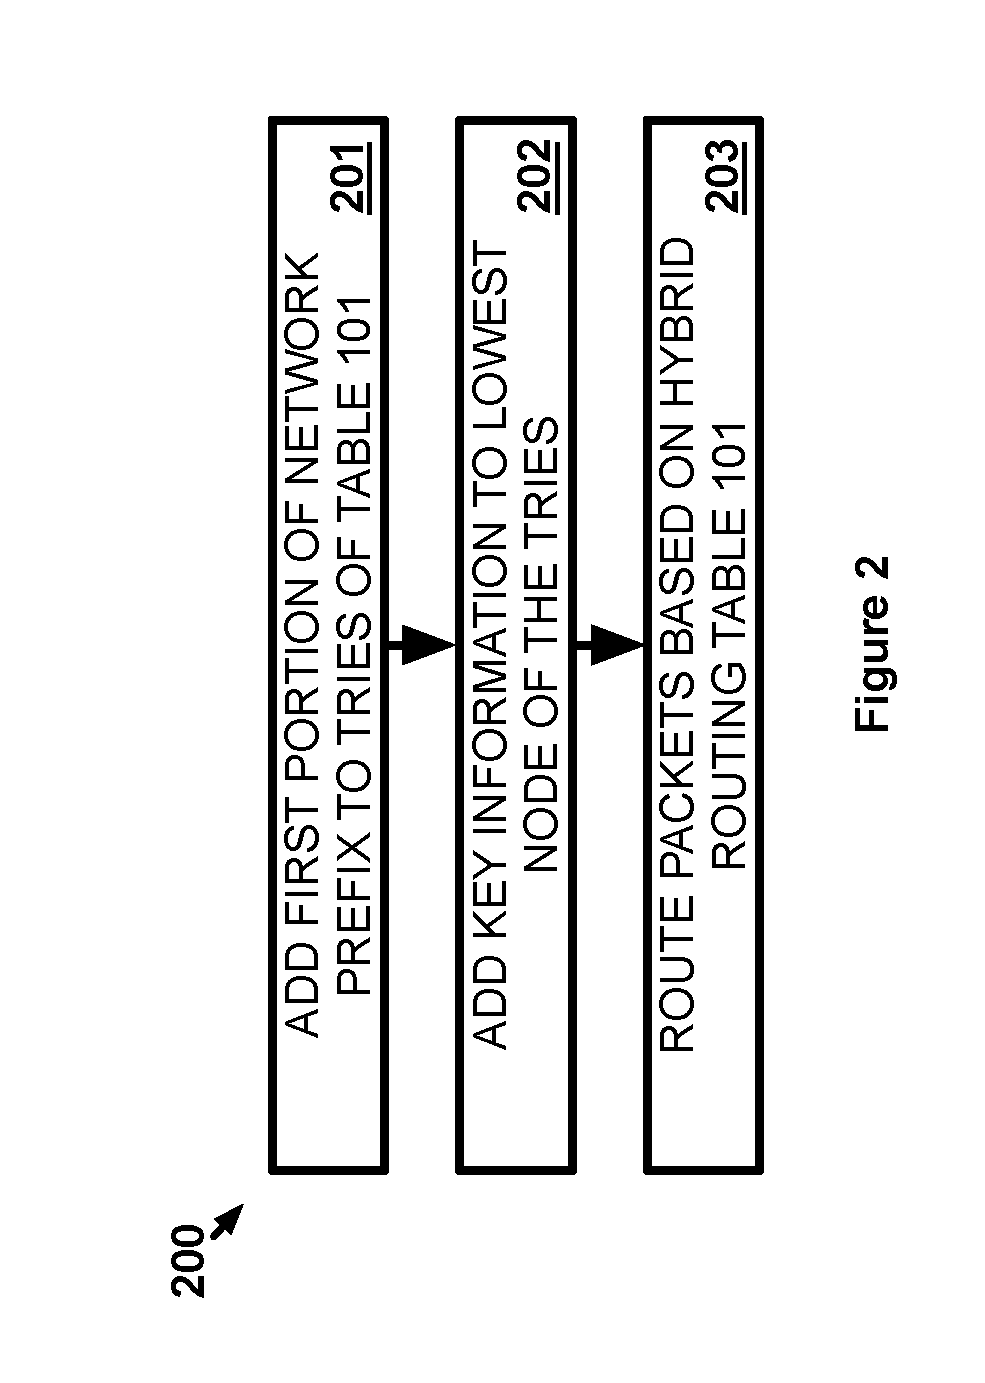 Hybrid routing table for routing network traffic